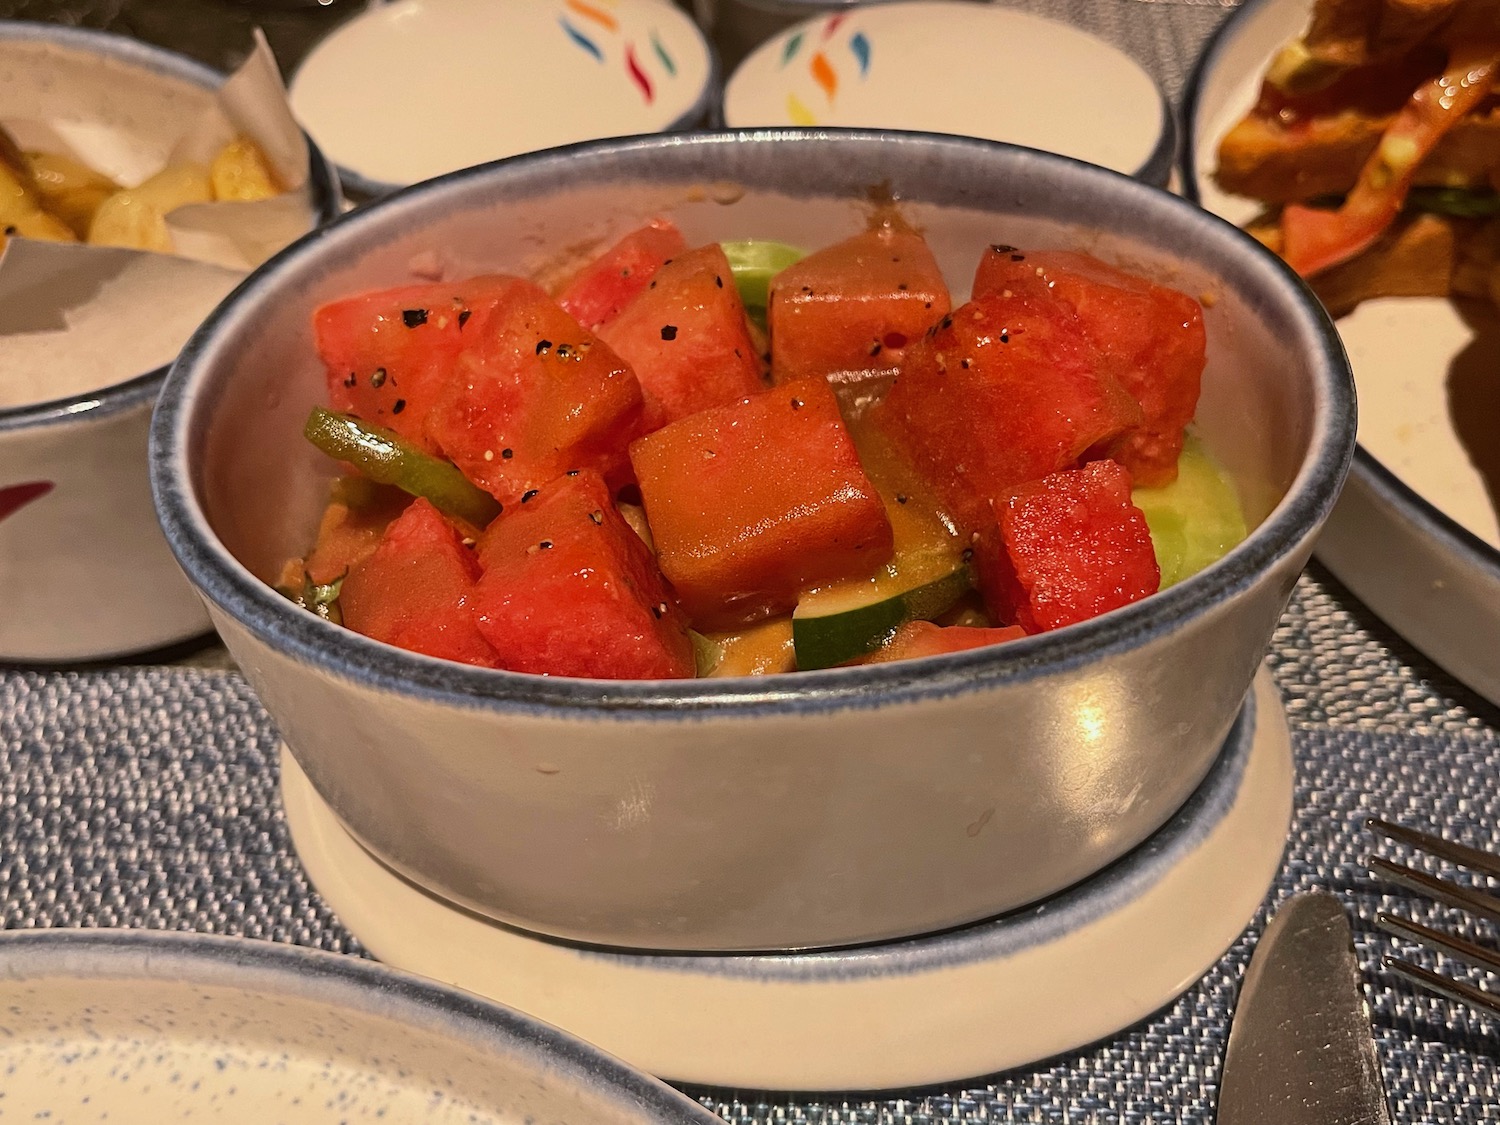 a bowl of watermelon and vegetables